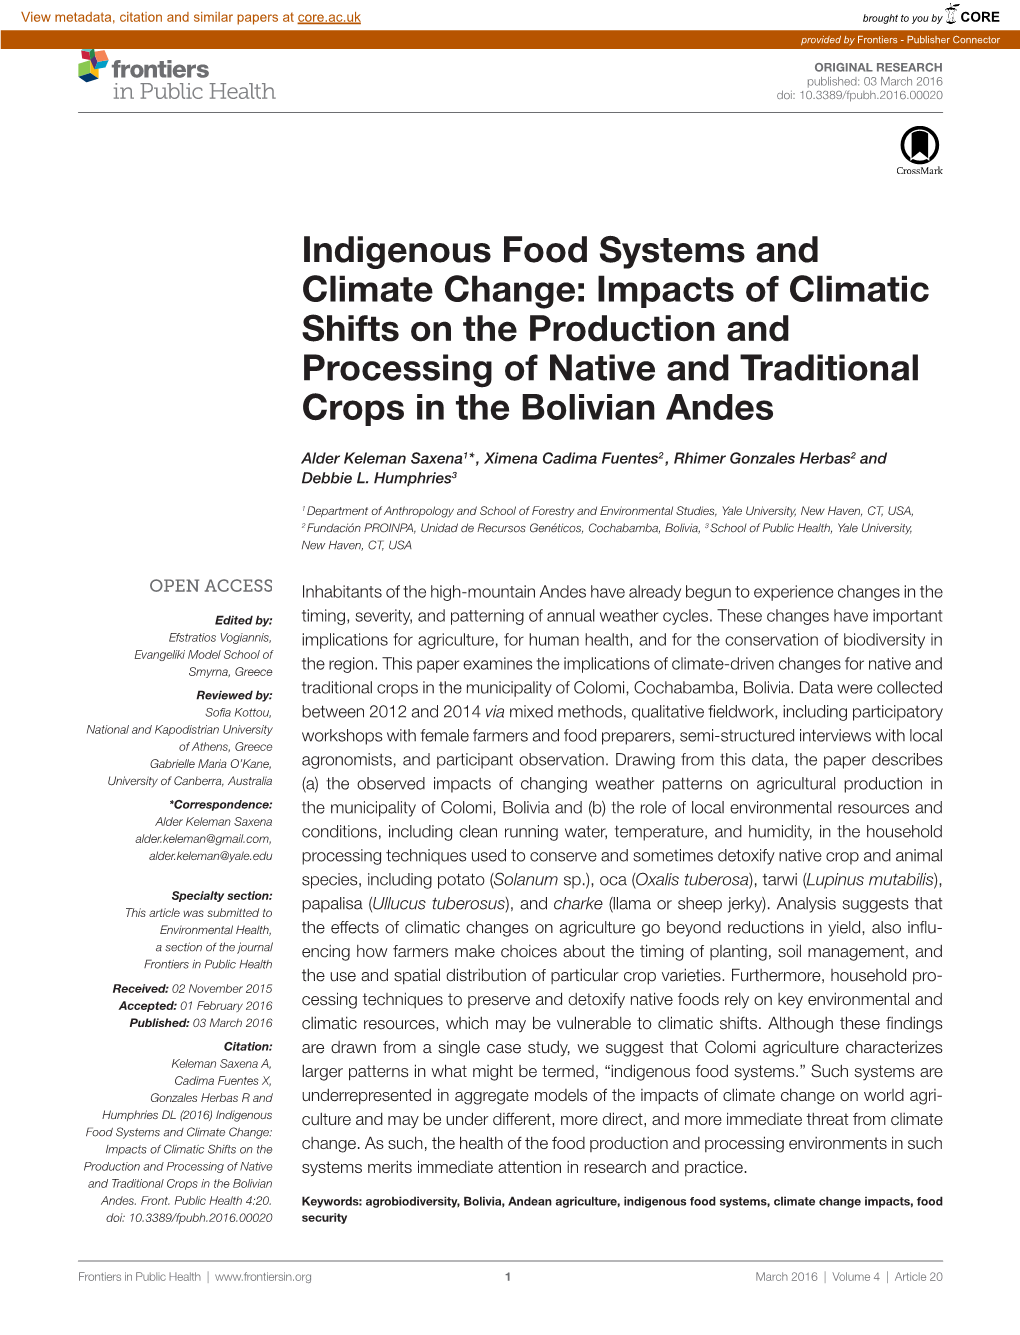 Indigenous Food Systems and Climate Change: Impacts of Climatic Shifts on the Production and Processing of Native and Traditional Crops in the Bolivian Andes